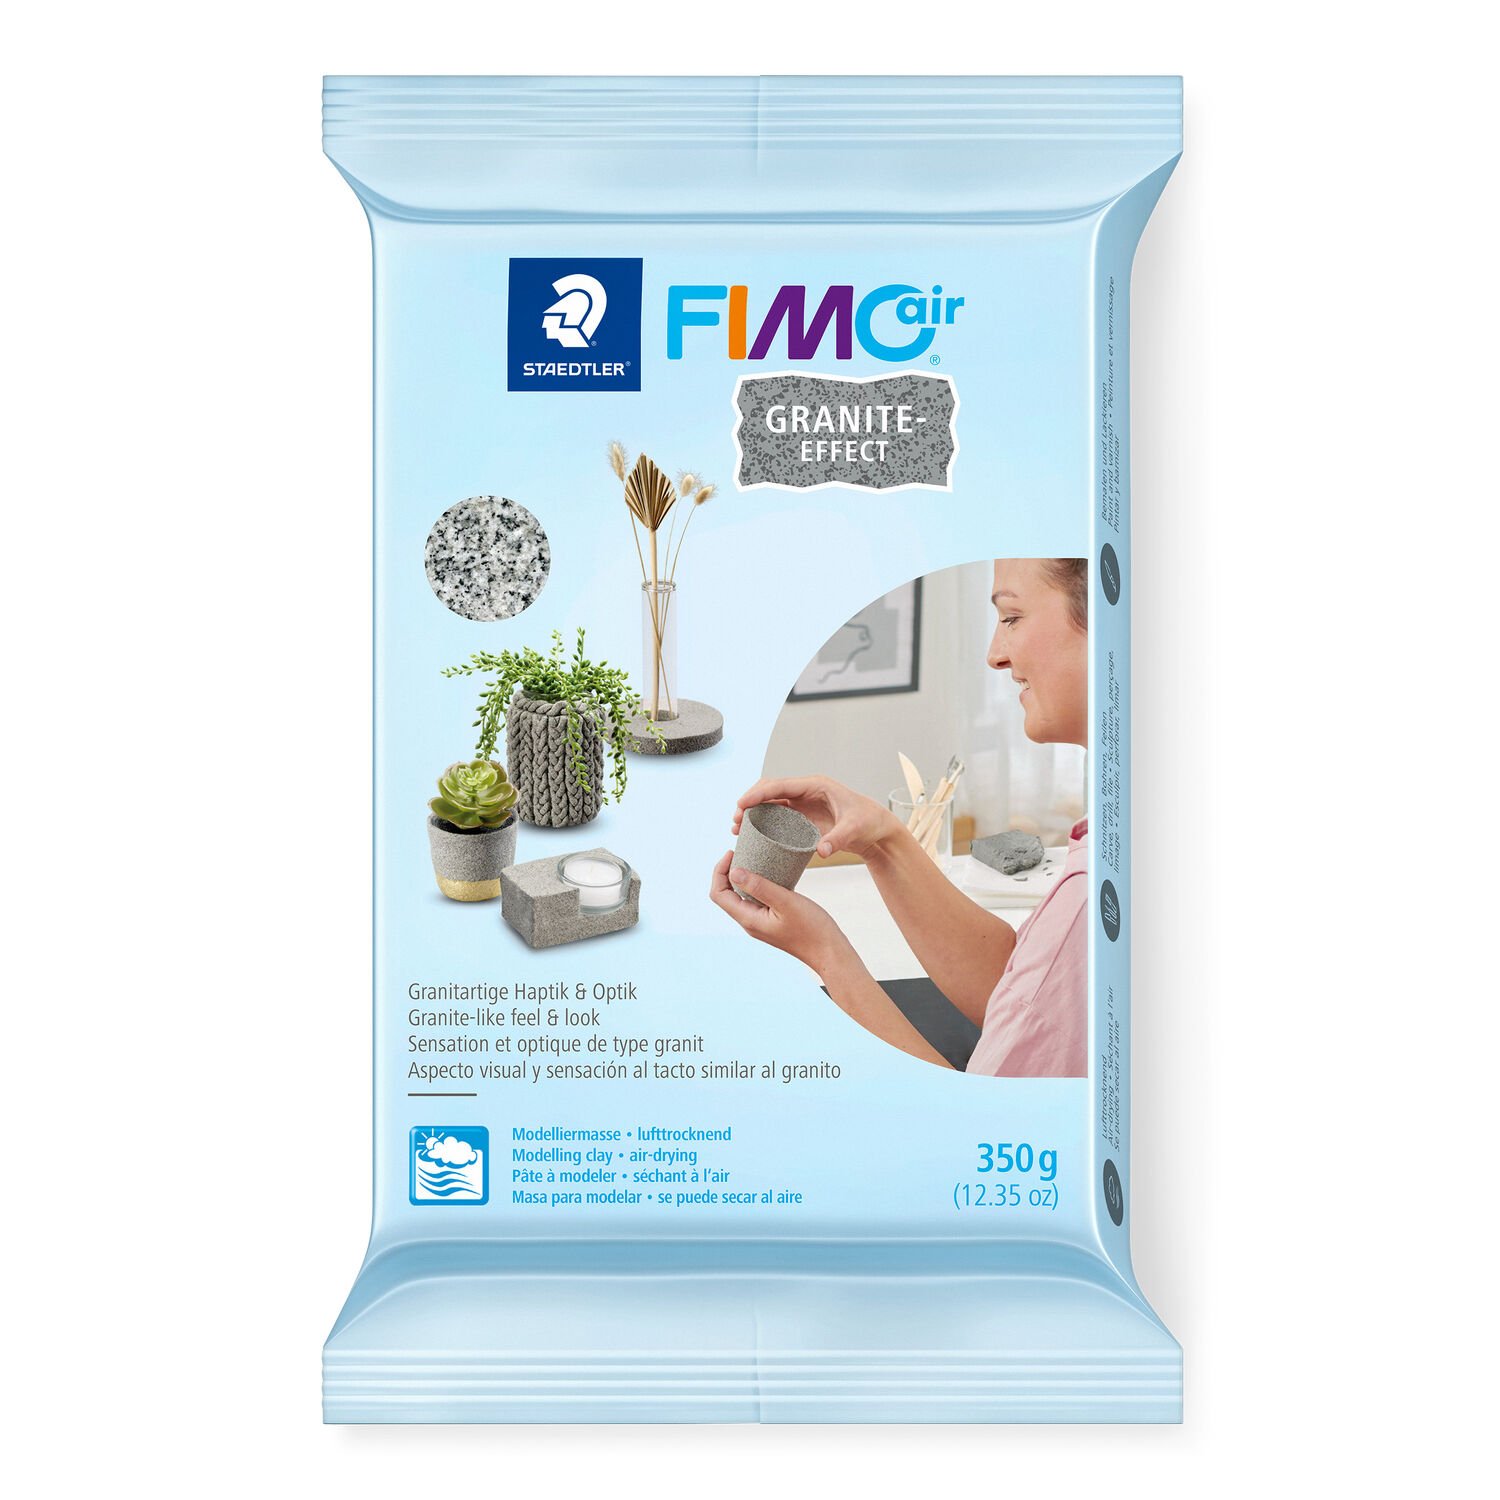 FIMO®air granite-effect 8150 - Air-drying modelling clay